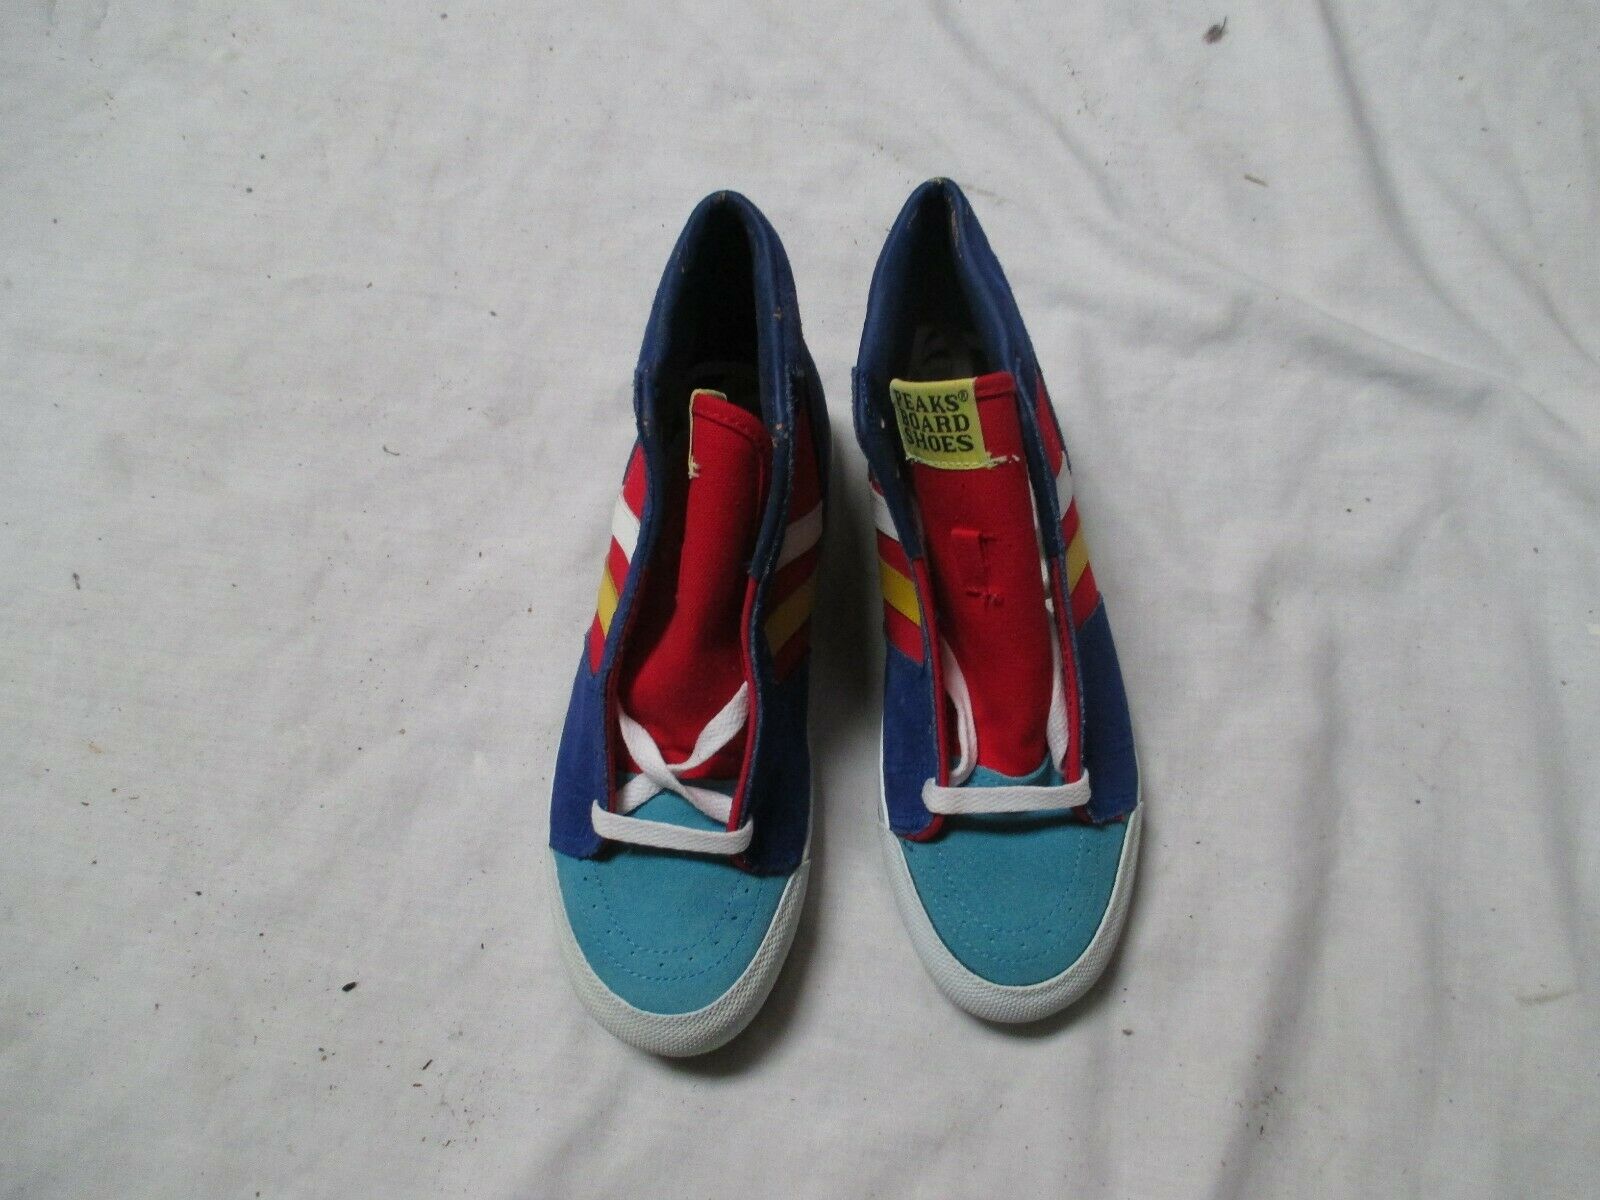 PEAKS MULTI-COLORED YOUTH TENNIS SHOE SIZE 6